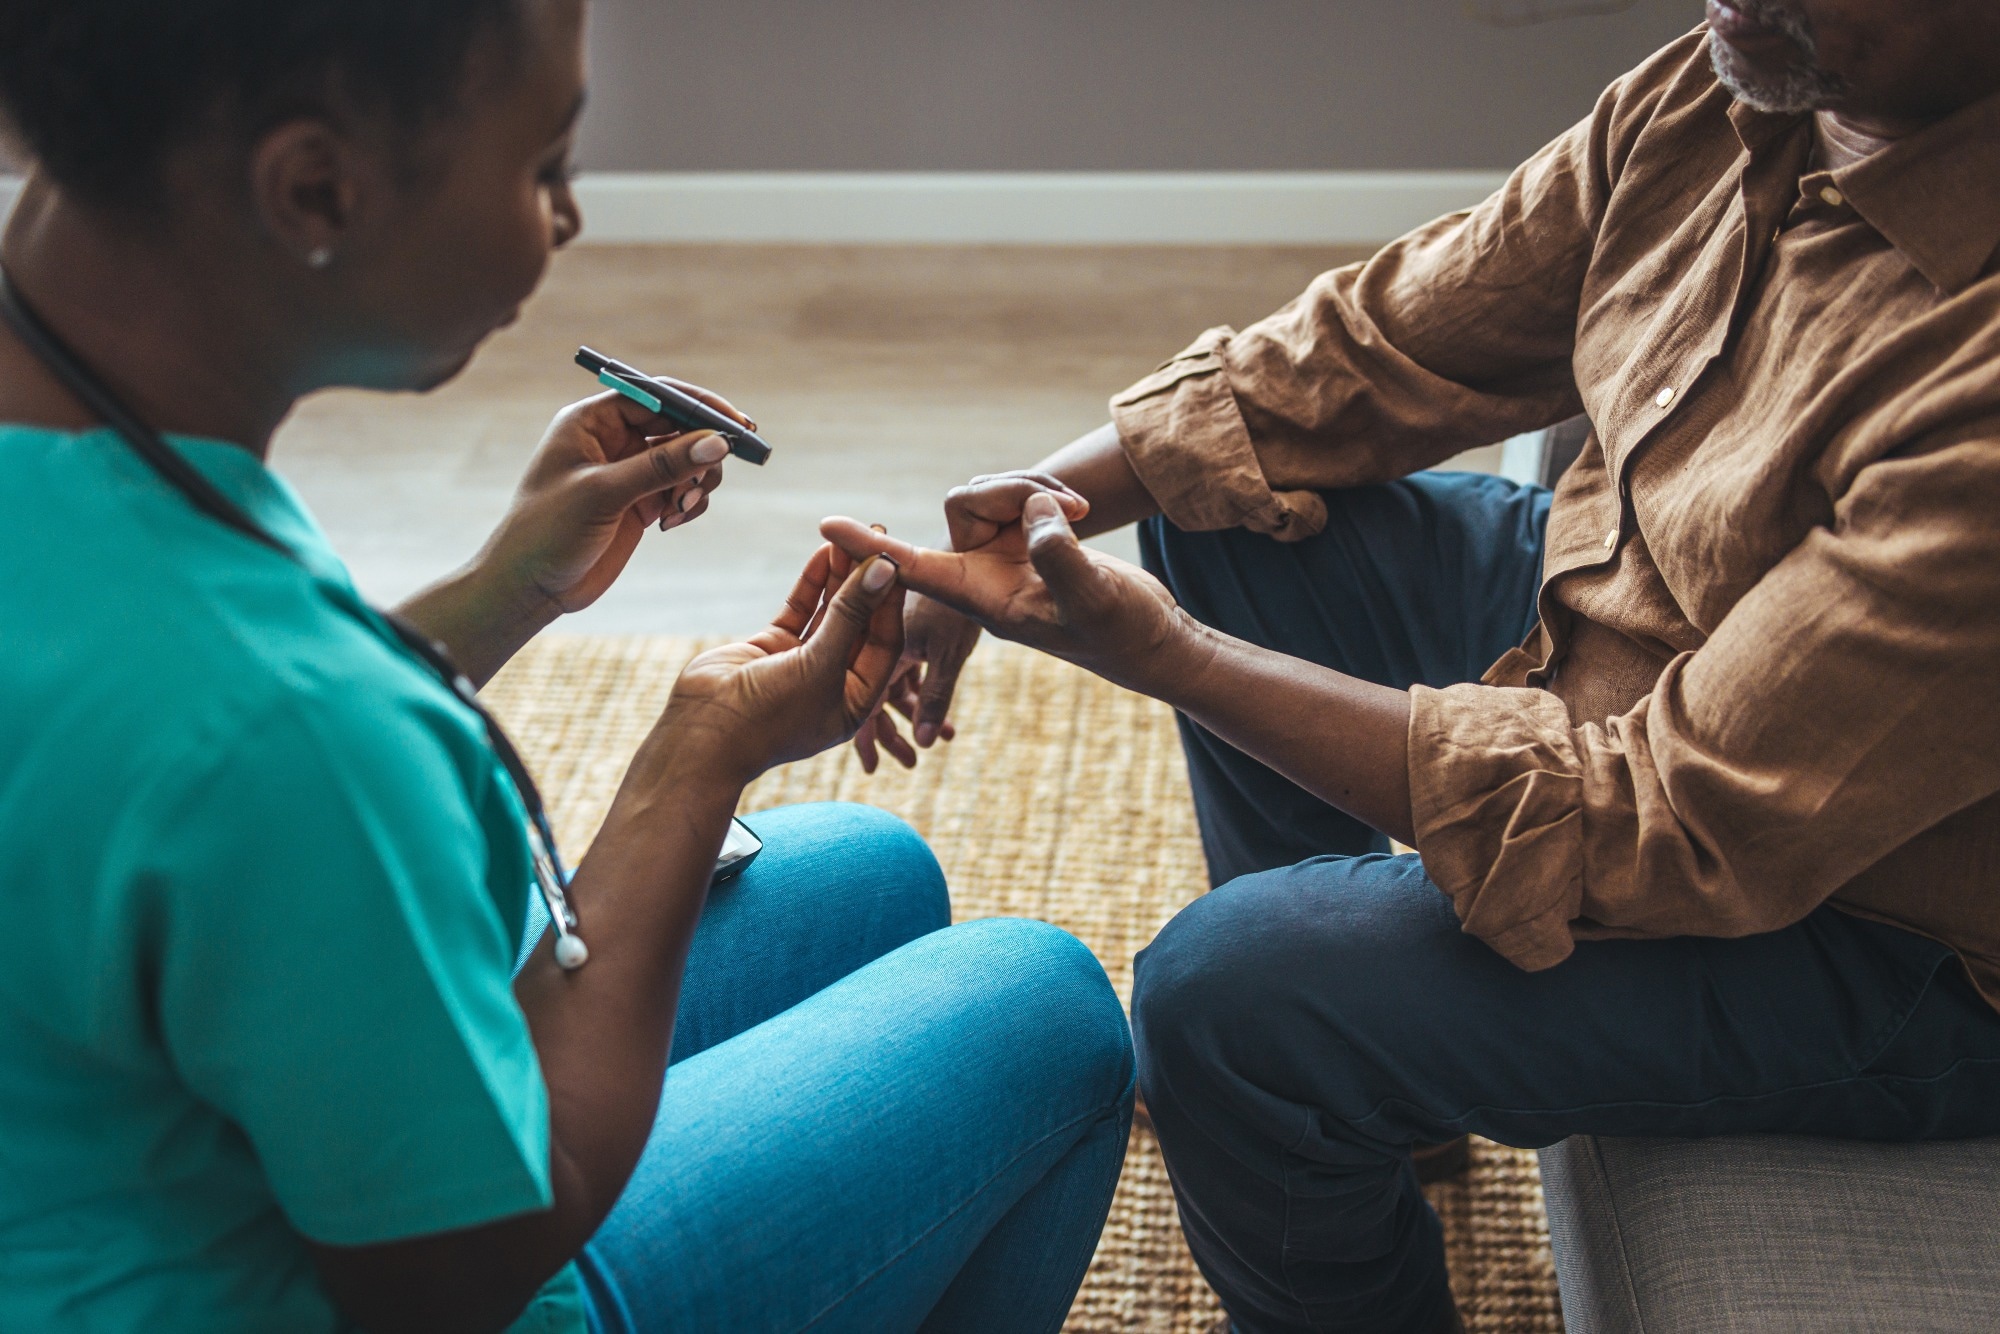 Study: Are people with diabetes getting the support they need? Deficits between support desired and received from family and friends relates to poorer health. Image Credit: Dragana Gordic / Shutterstock